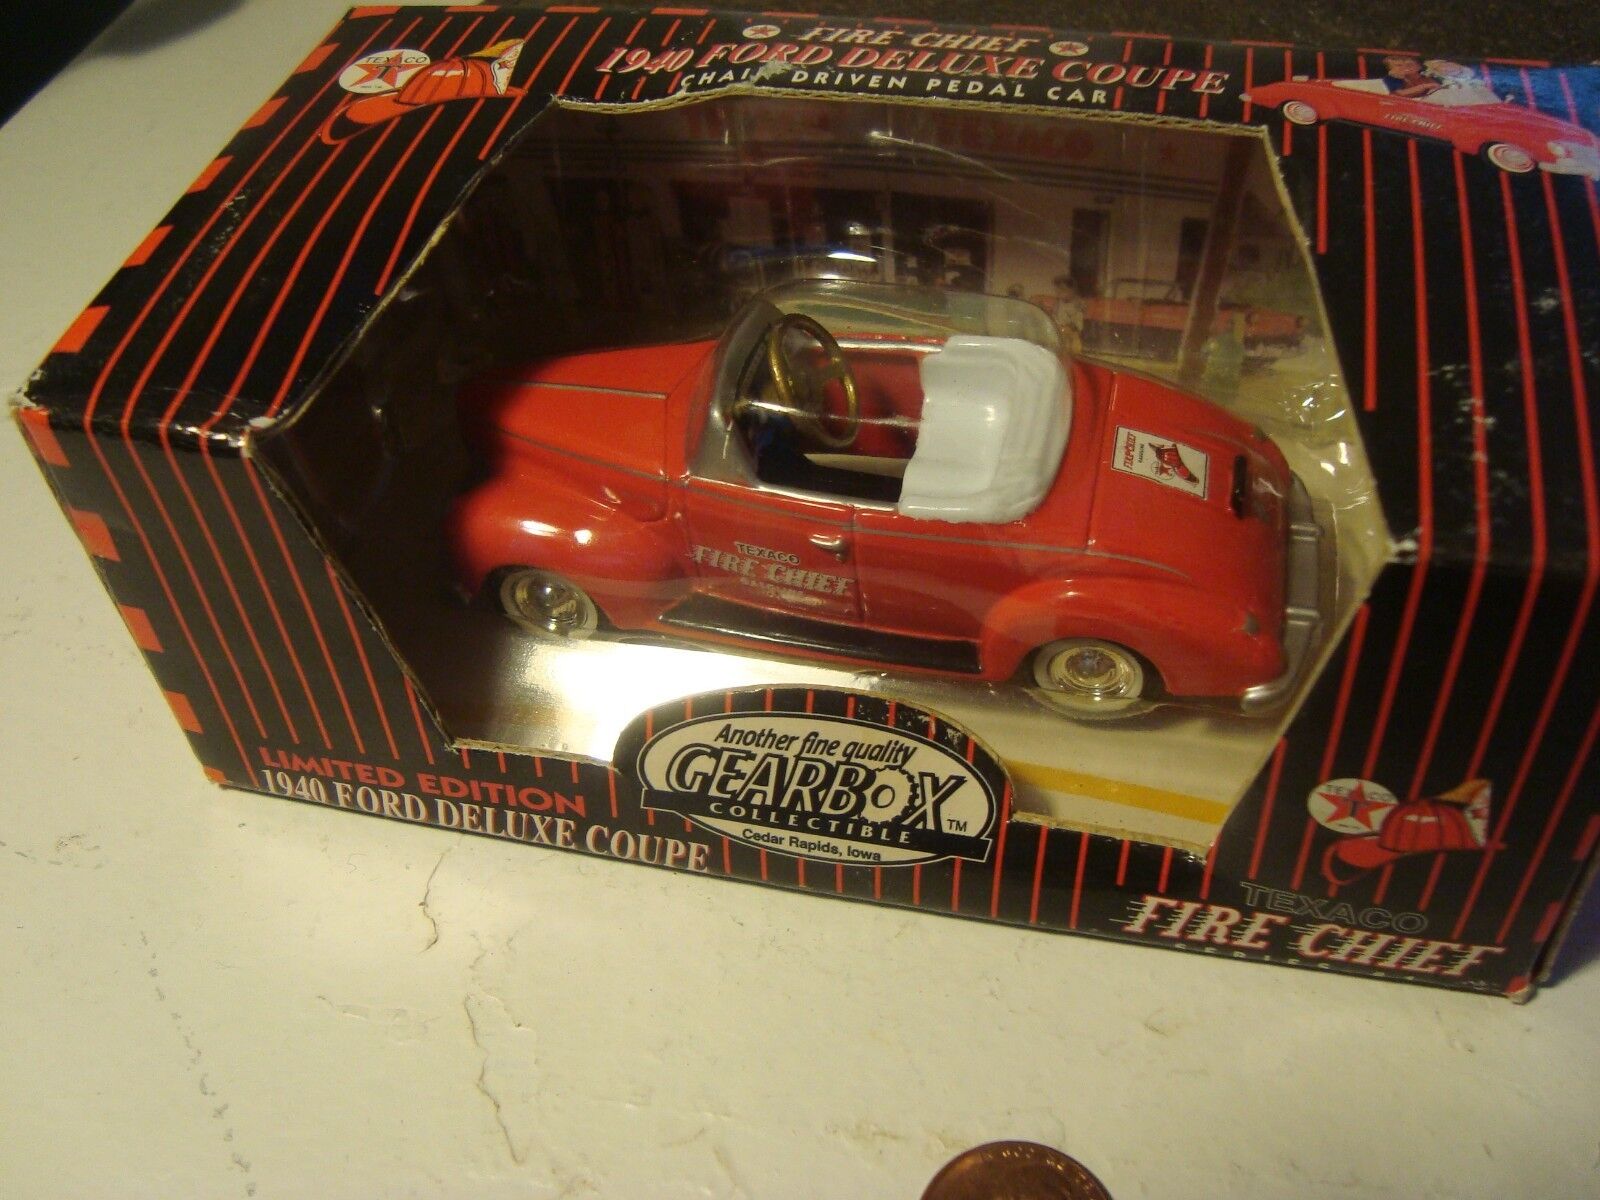 Texaco Fire Chief 1997 Gearbox Convertible Red 1940 Ford Coupe Pedal Toy Car 